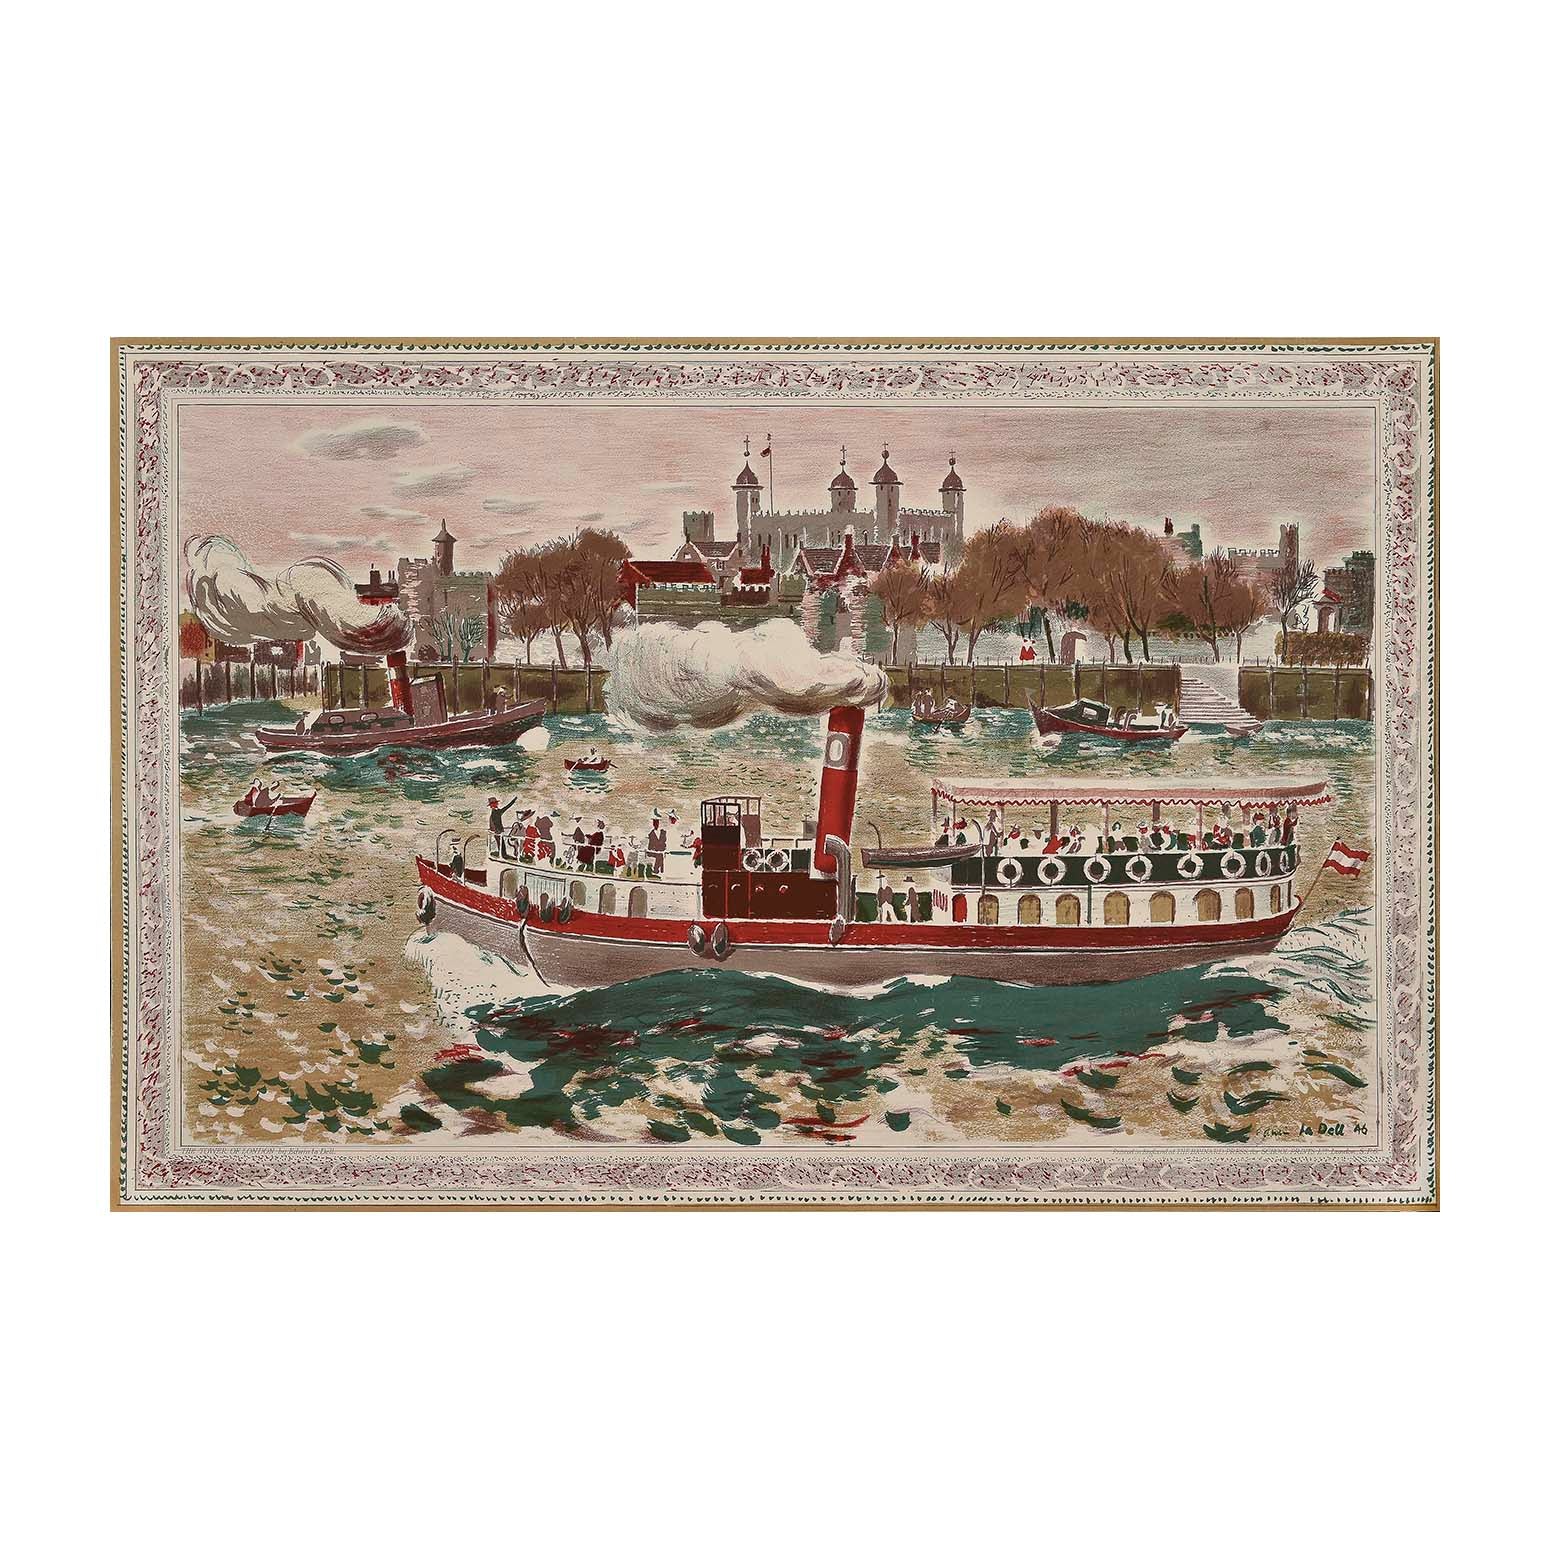 Original ‘School Print’, Tower of London, by Edwin La Dell, and published by School Prints Ltd, 1946. The image depicts a passenger steamboat on the River Thames with the Tower of London in the background.